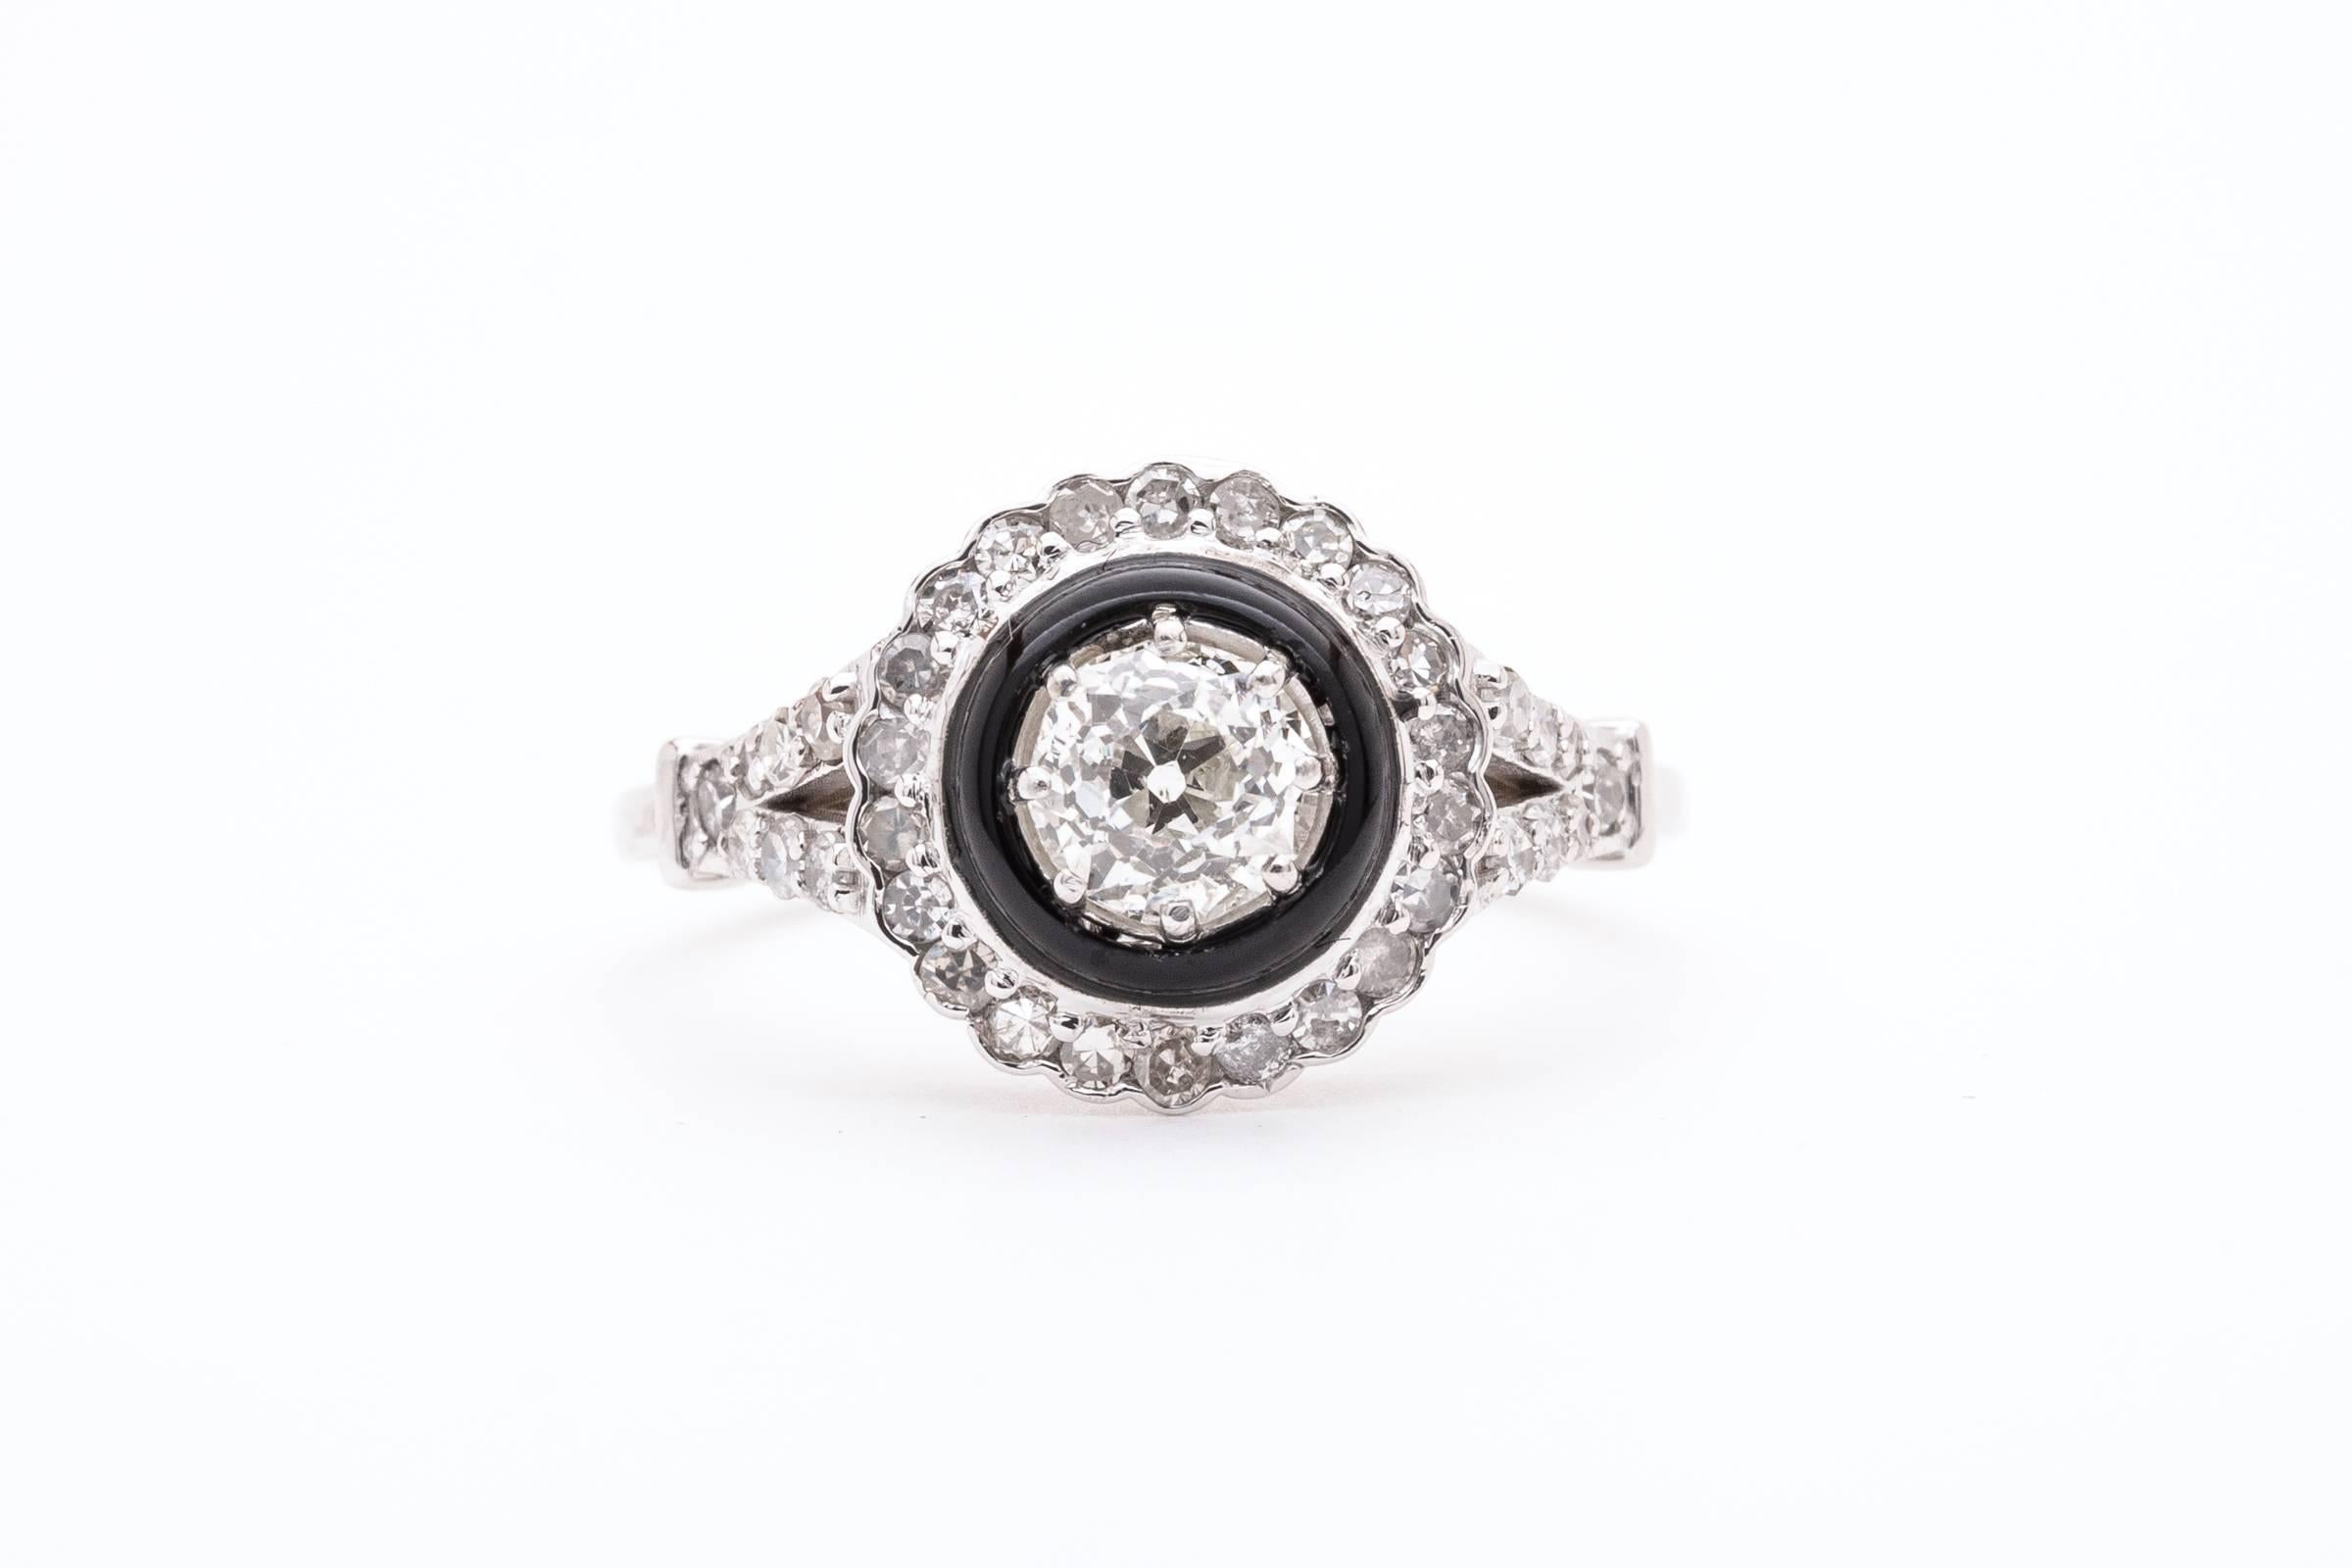 A dramatic diamond engagement ring in 14 karat white gold. Centered by a 0.56 carat European cut diamond this ring features a double halo of pave set diamonds and rich black onyx.

Grading as beautfiul VS clarity and top white G/H color the center